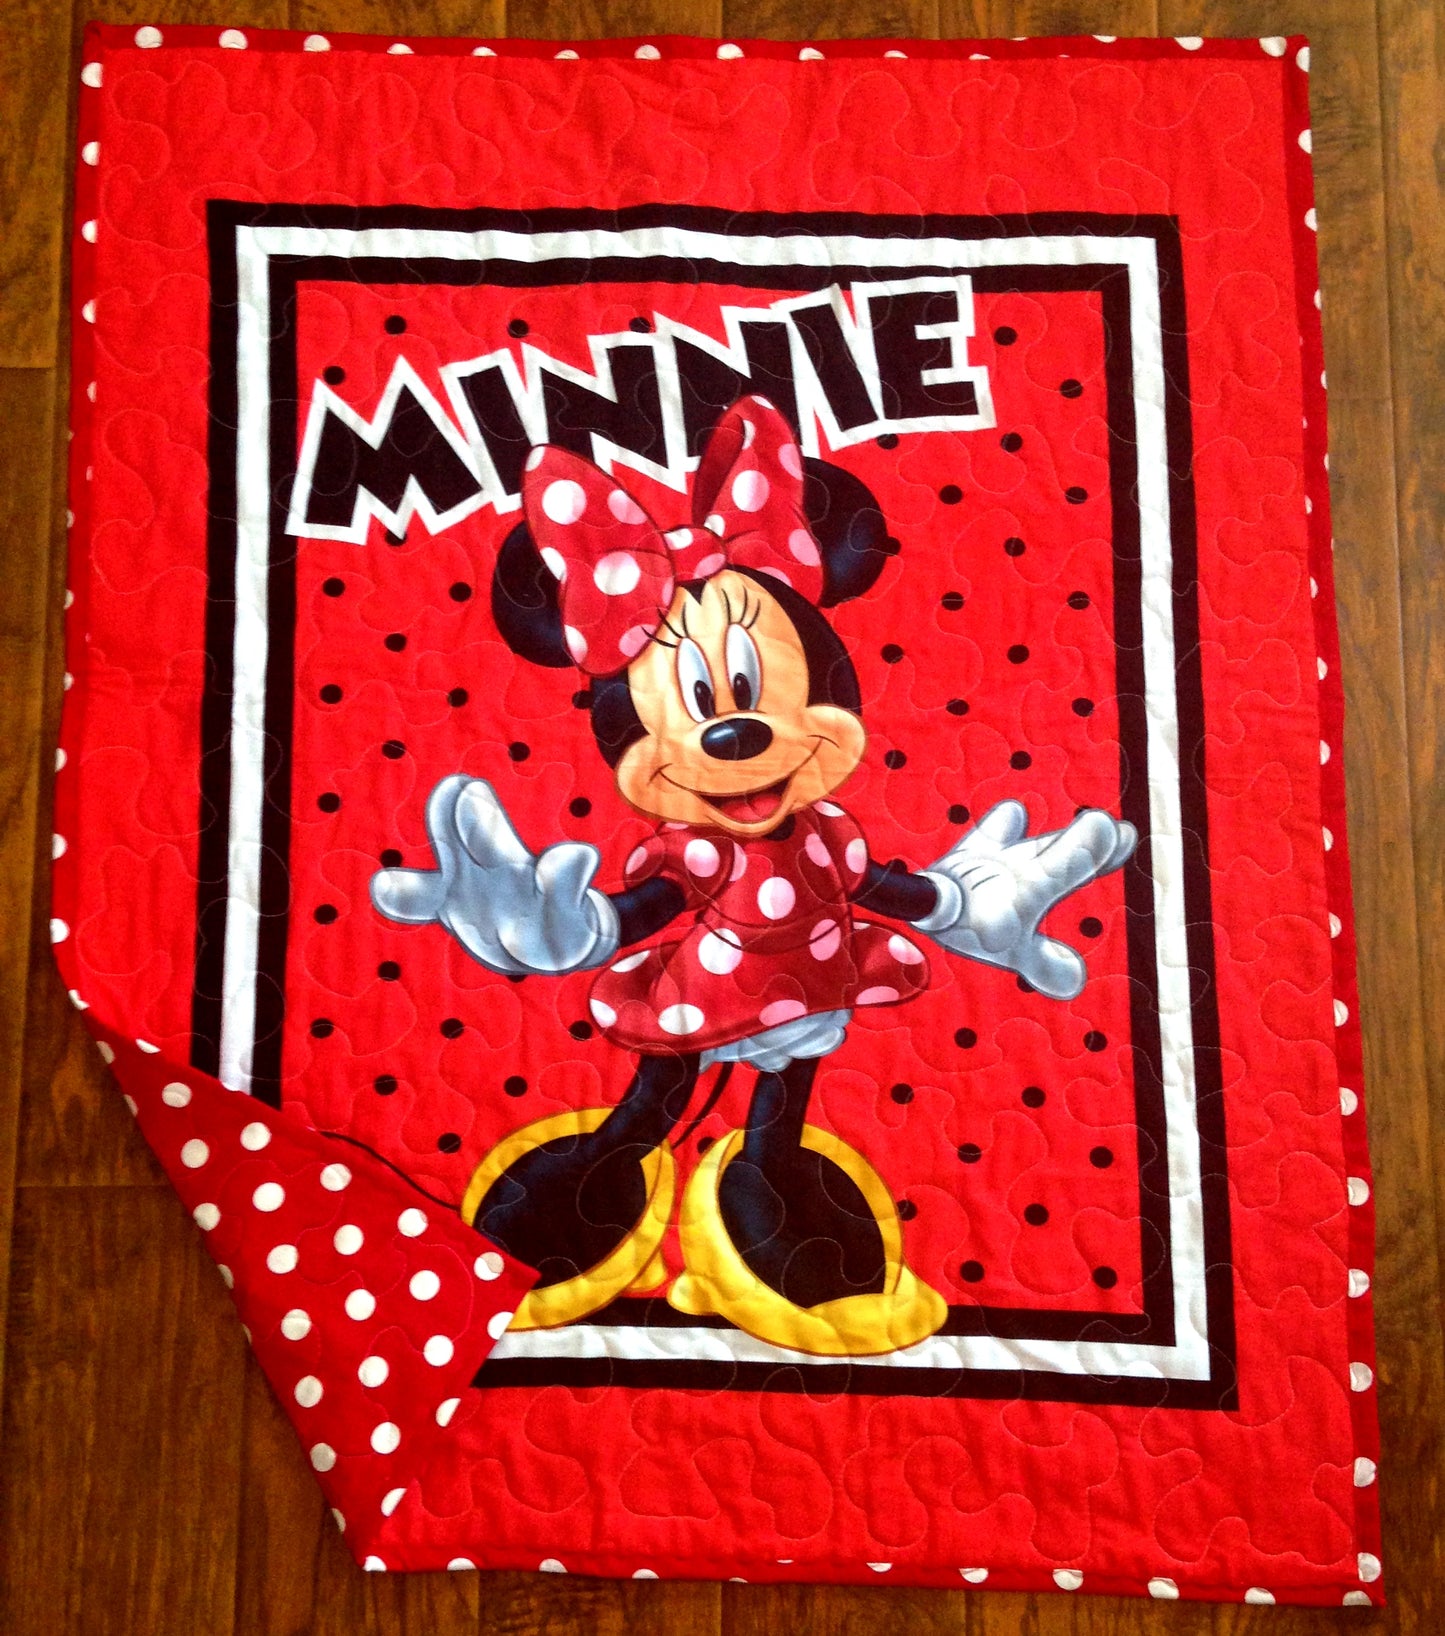 MINNIE MOUSE Inspired Baby Child Quilted Blanket Baby Nursery Child Toddler Bedding to Adult Lap Blanket